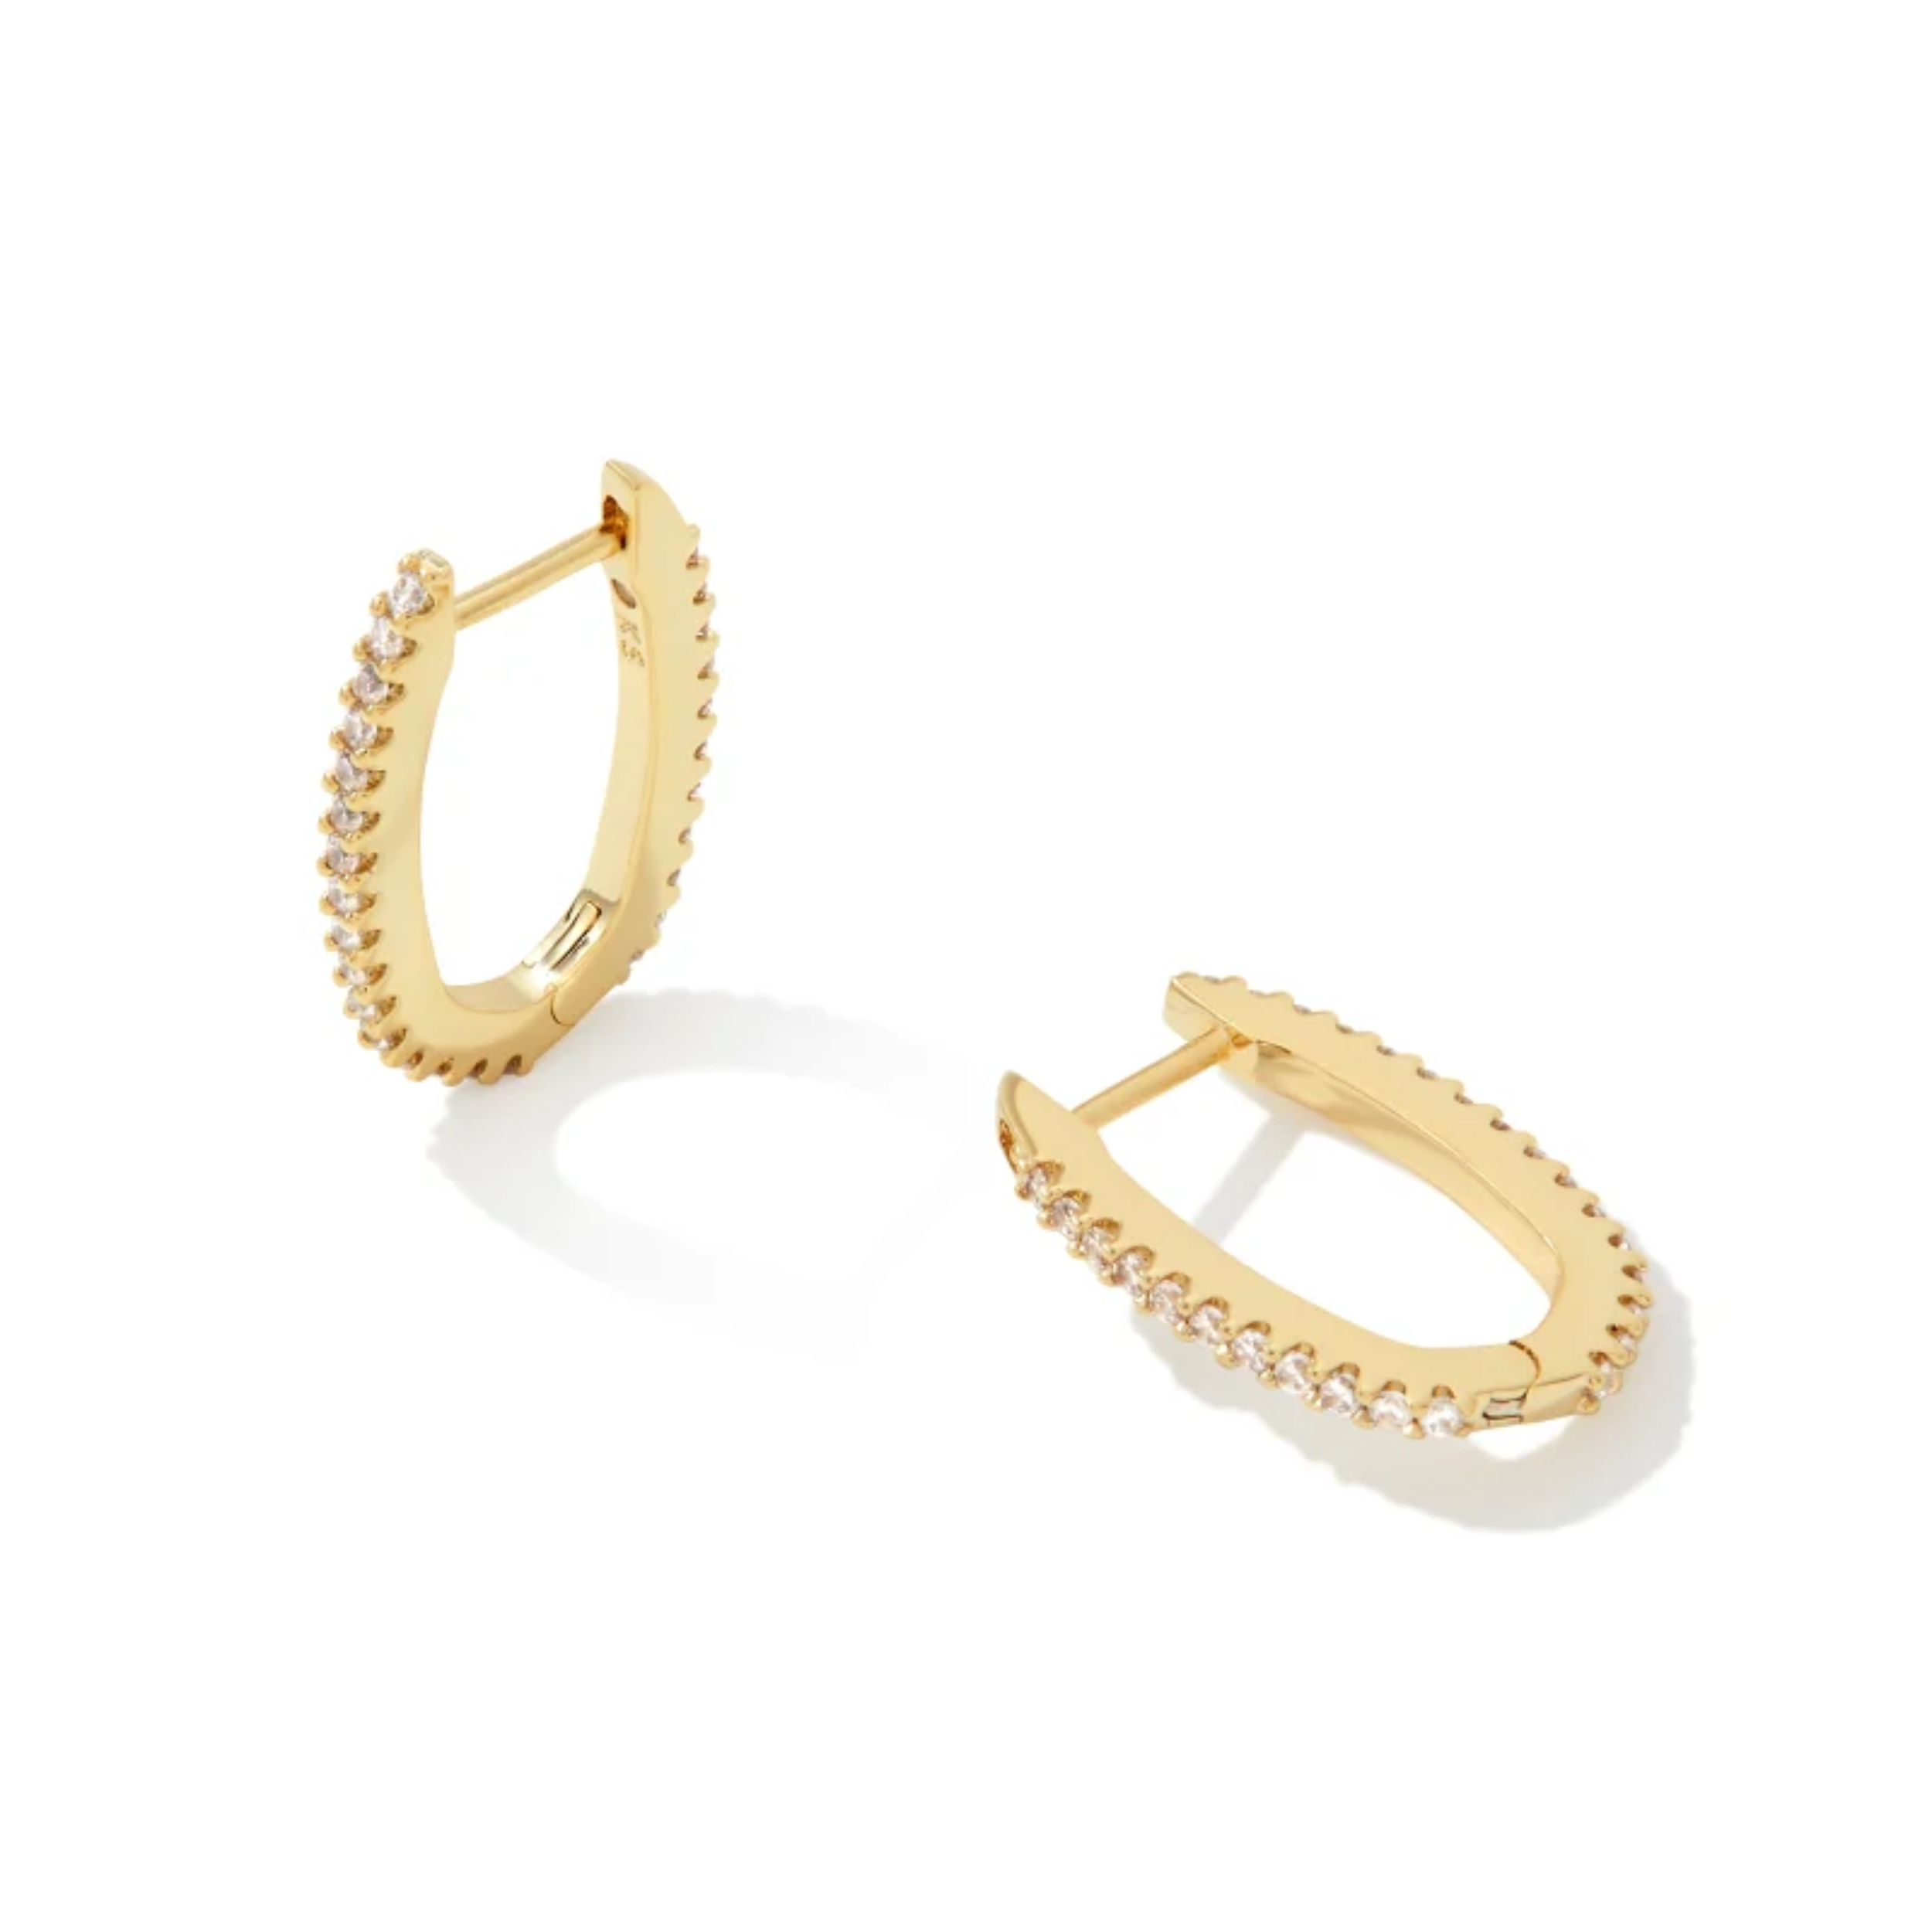 These Murphy Pave Gold Huggie earrings in White Crystal by Kendra Scott ae pictured on a white background.